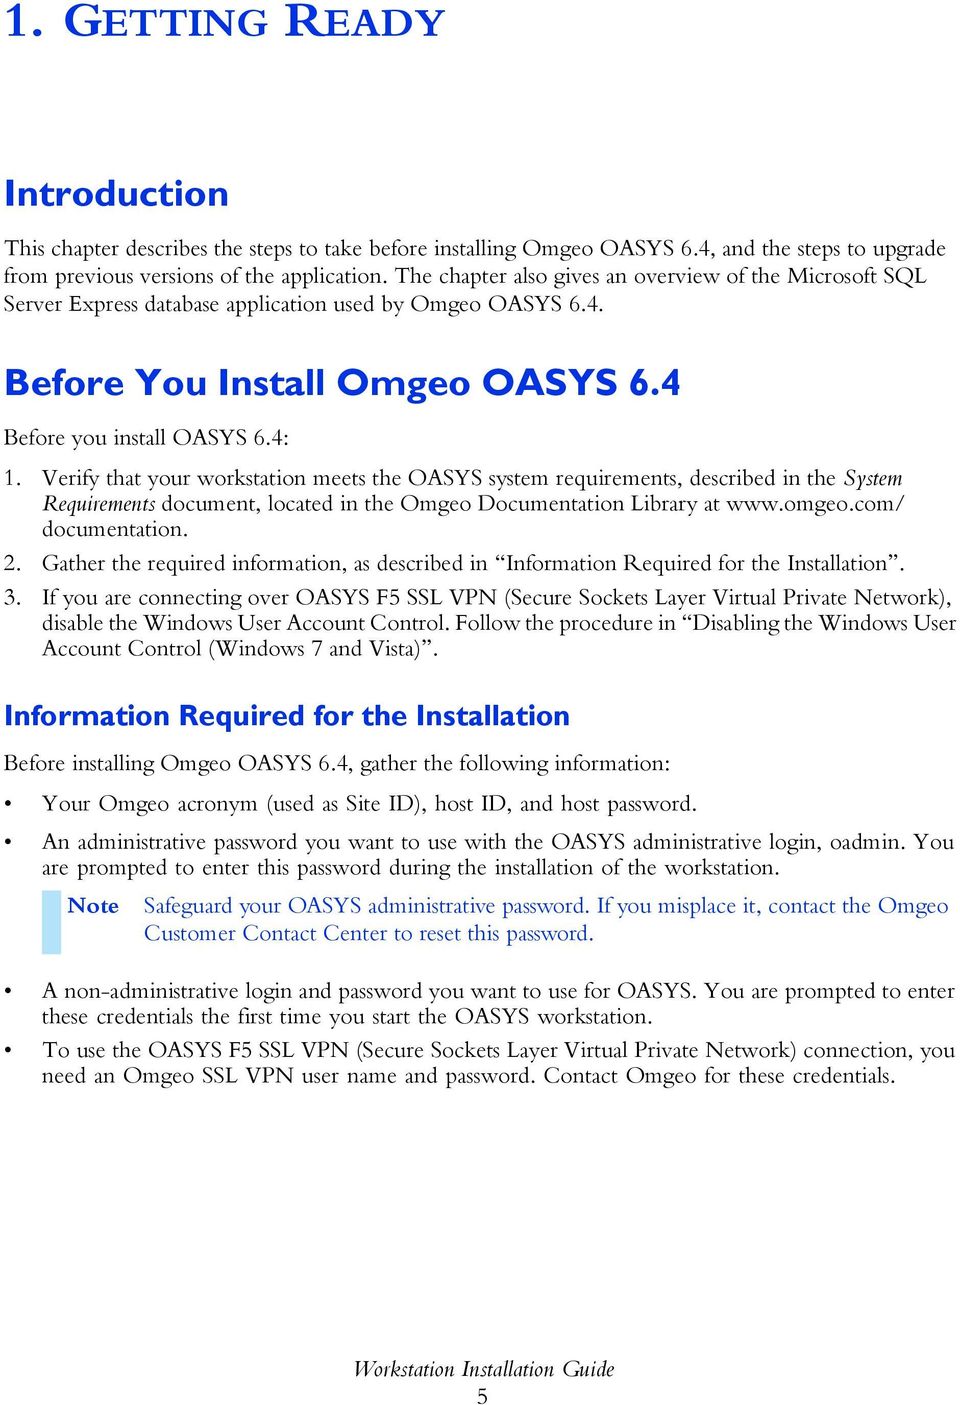 Verify that your workstation meets the OASYS system requirements, described in the System Requirements document, located in the Omgeo Documentation Library at www.omgeo.com/ documentation. 2.